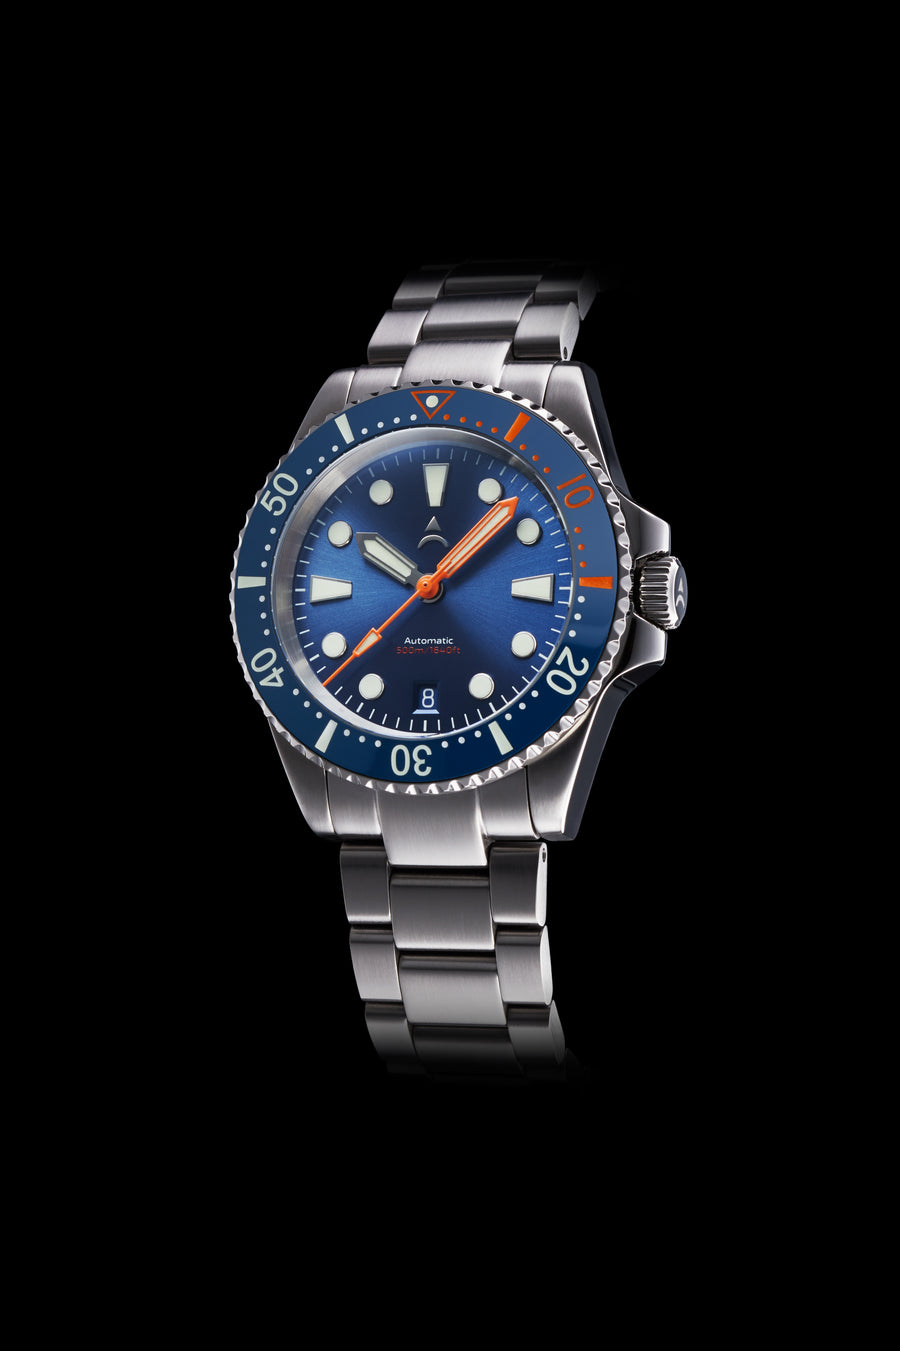 The Axios Ironclad Horizon features a blue sunburst dial and orange accents on its ceramic bezel that is finished with double domed Sapphire crystal glass.